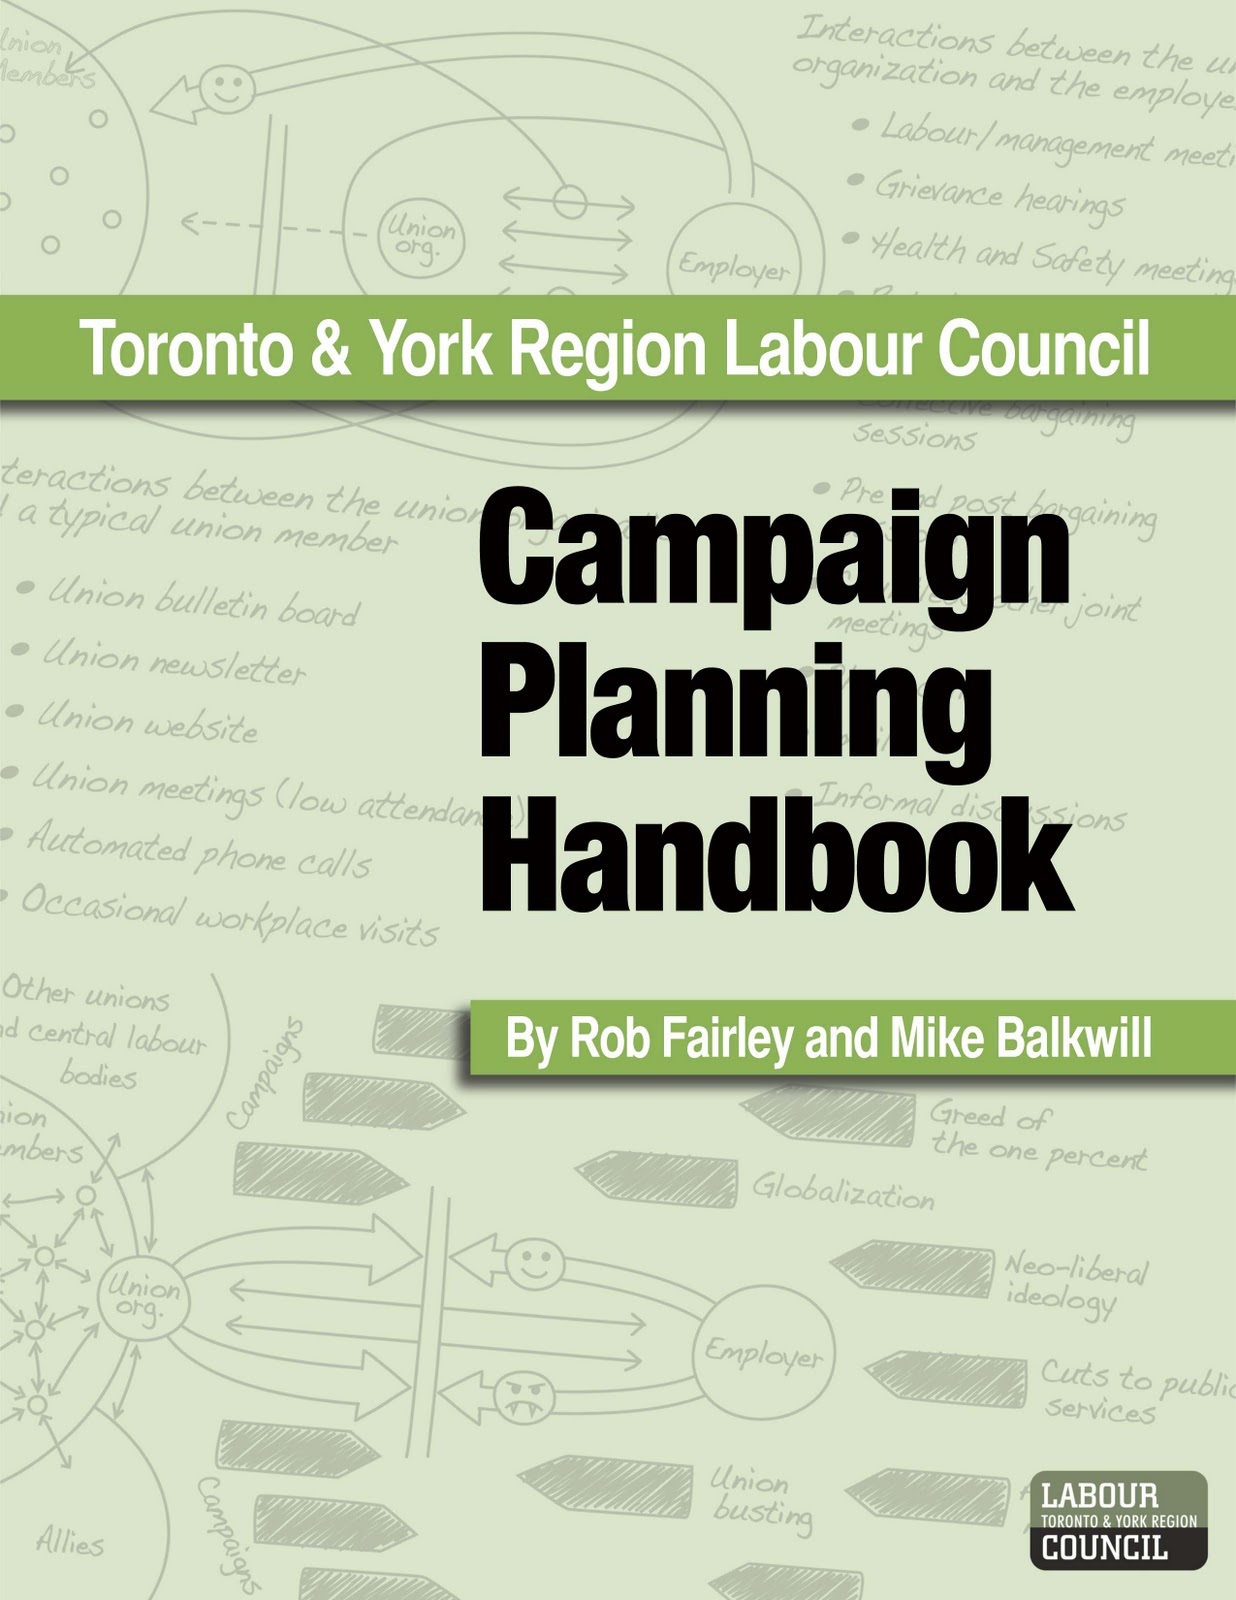 Next Year Country: New campaign planning handbook for Canadian union